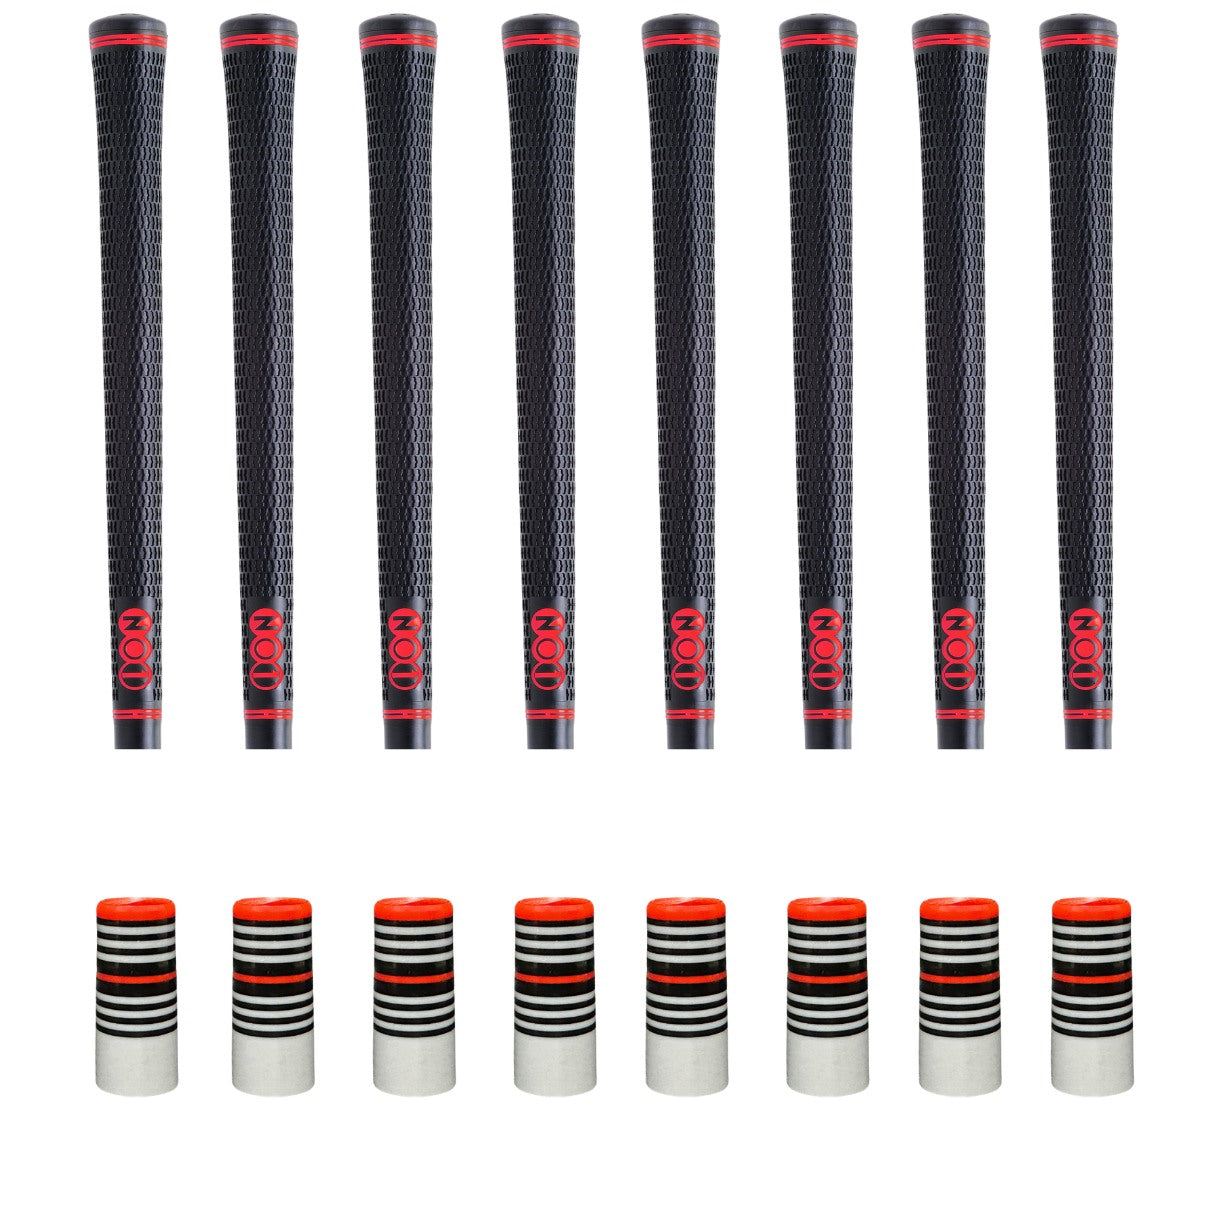 NO1 50 Pro Black Red and Fire Truck 2.0 Grip and Ferrule Kit